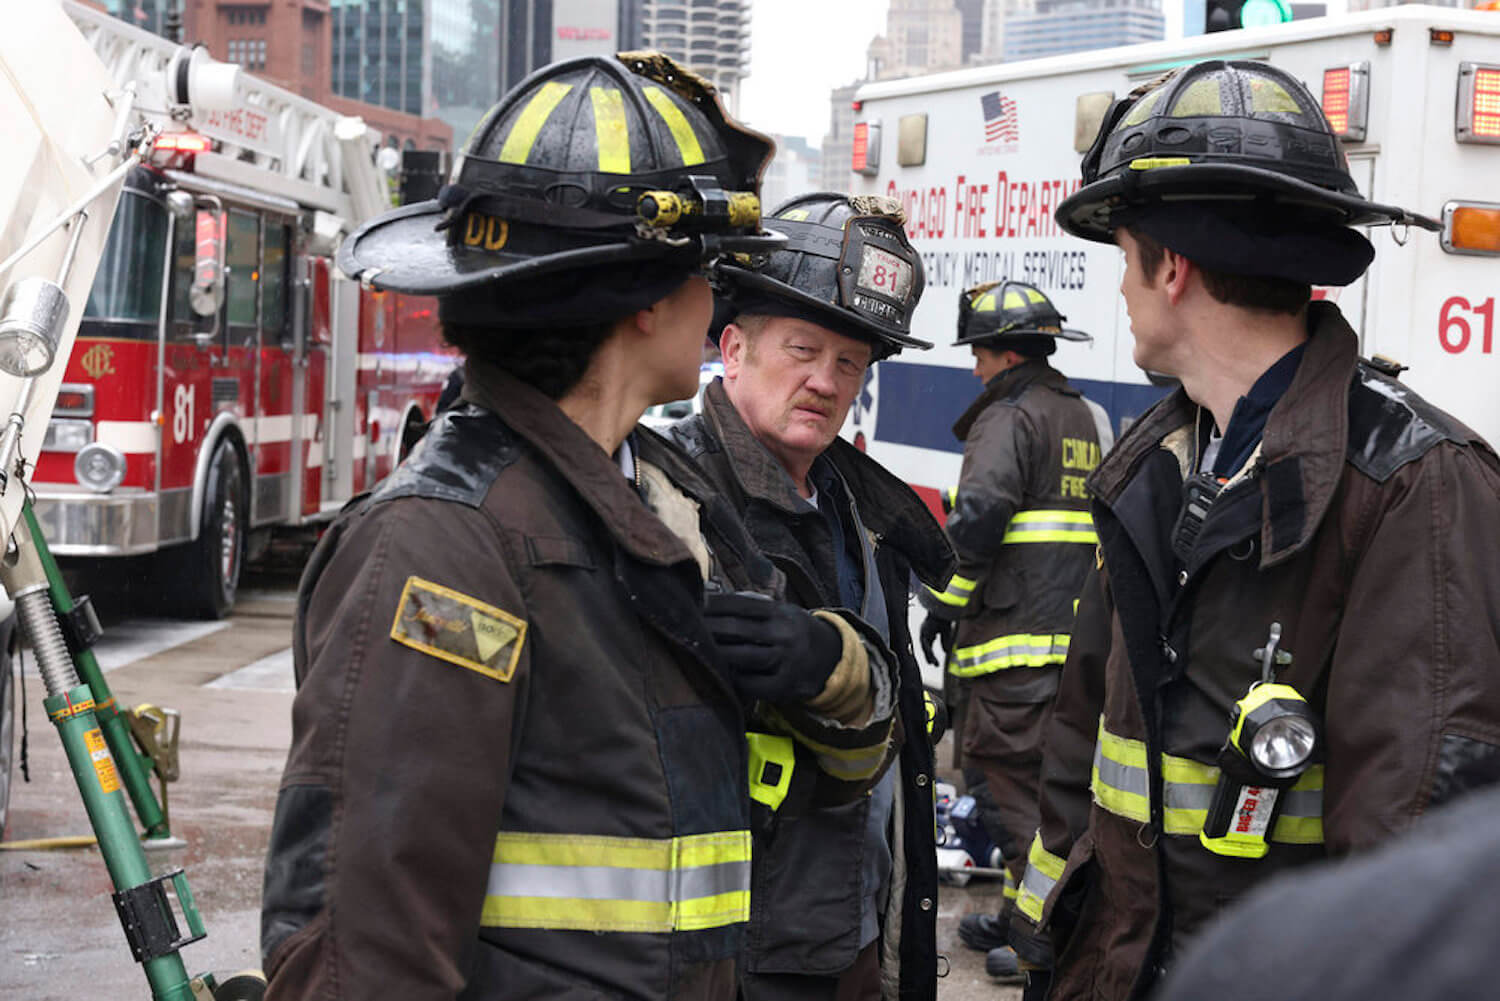 Firefighters speaking to Mouch in the 'Chicago Fire' Season 11